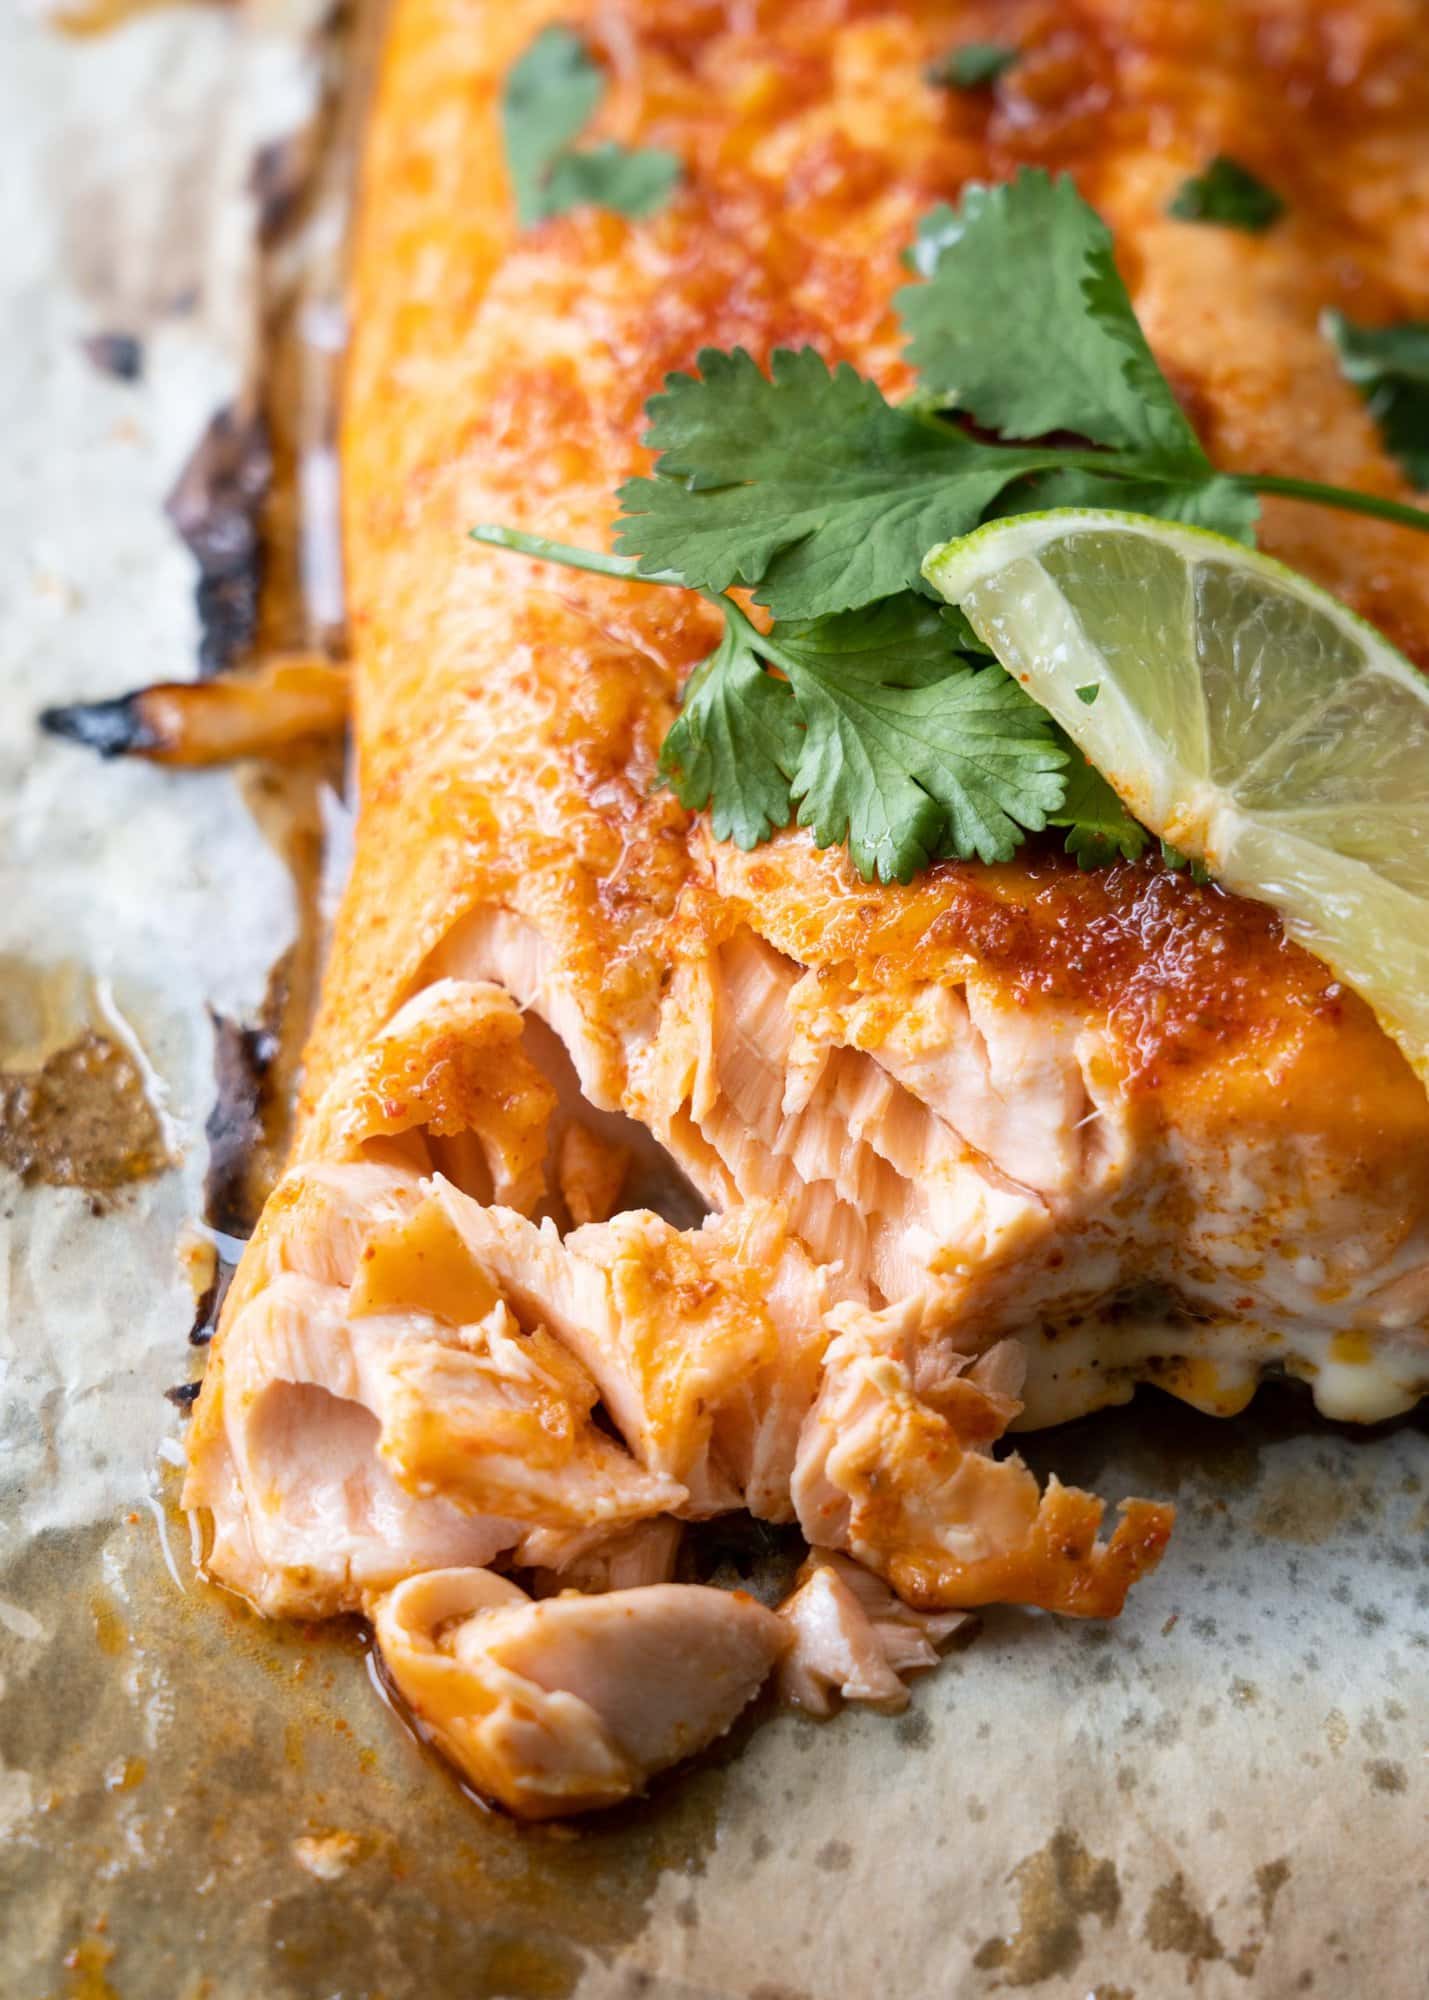 Baked salmon has tender and flaky meat inside as shown in the image with celery and a lime slice.